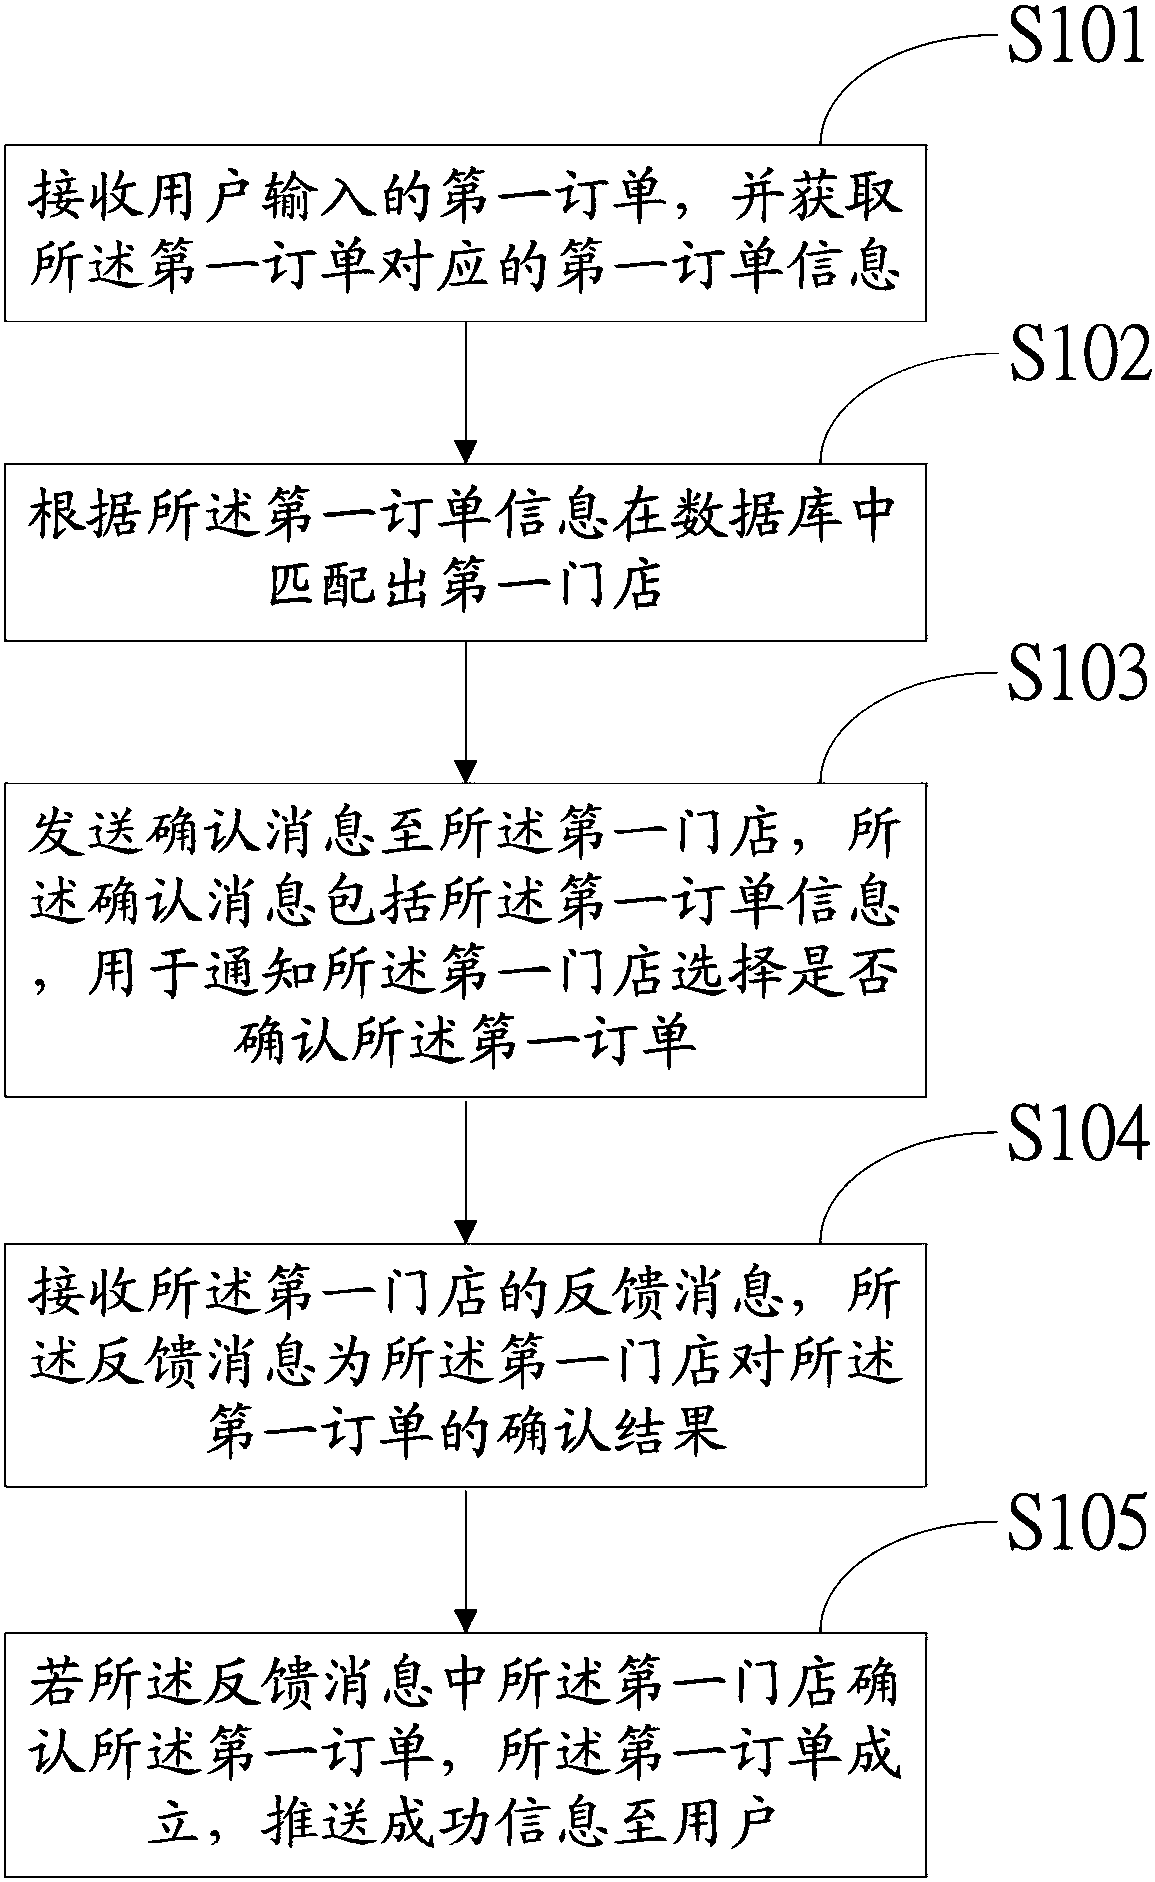 Order form processing method and system